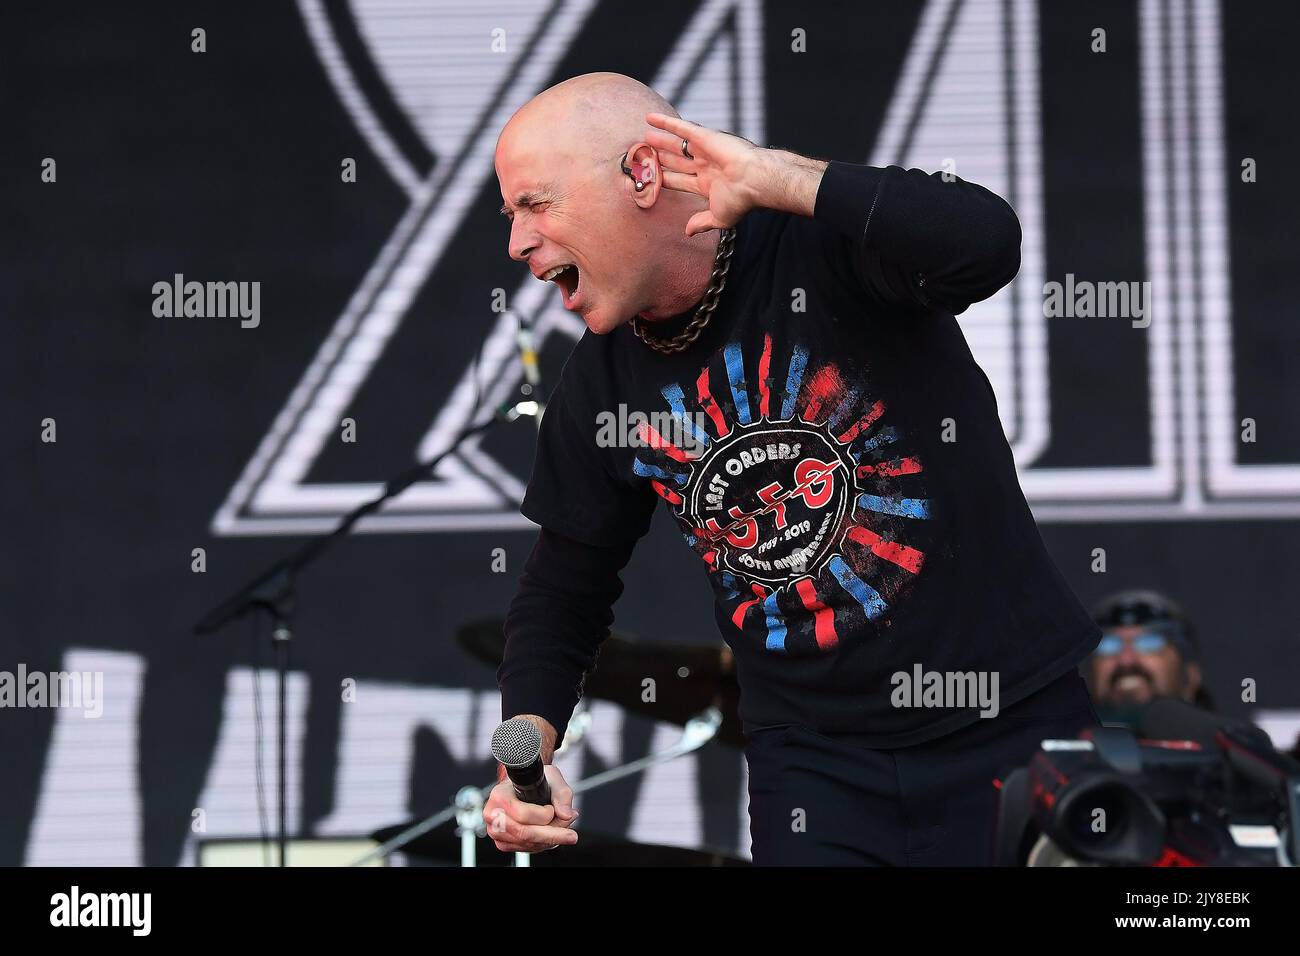 Rio de Janeiro, Brazil,September 2, 2022. American vocalist John Bush during a concert of the band Metal Allegiance at Rock in Rio 2022, in the city o Stock Photo